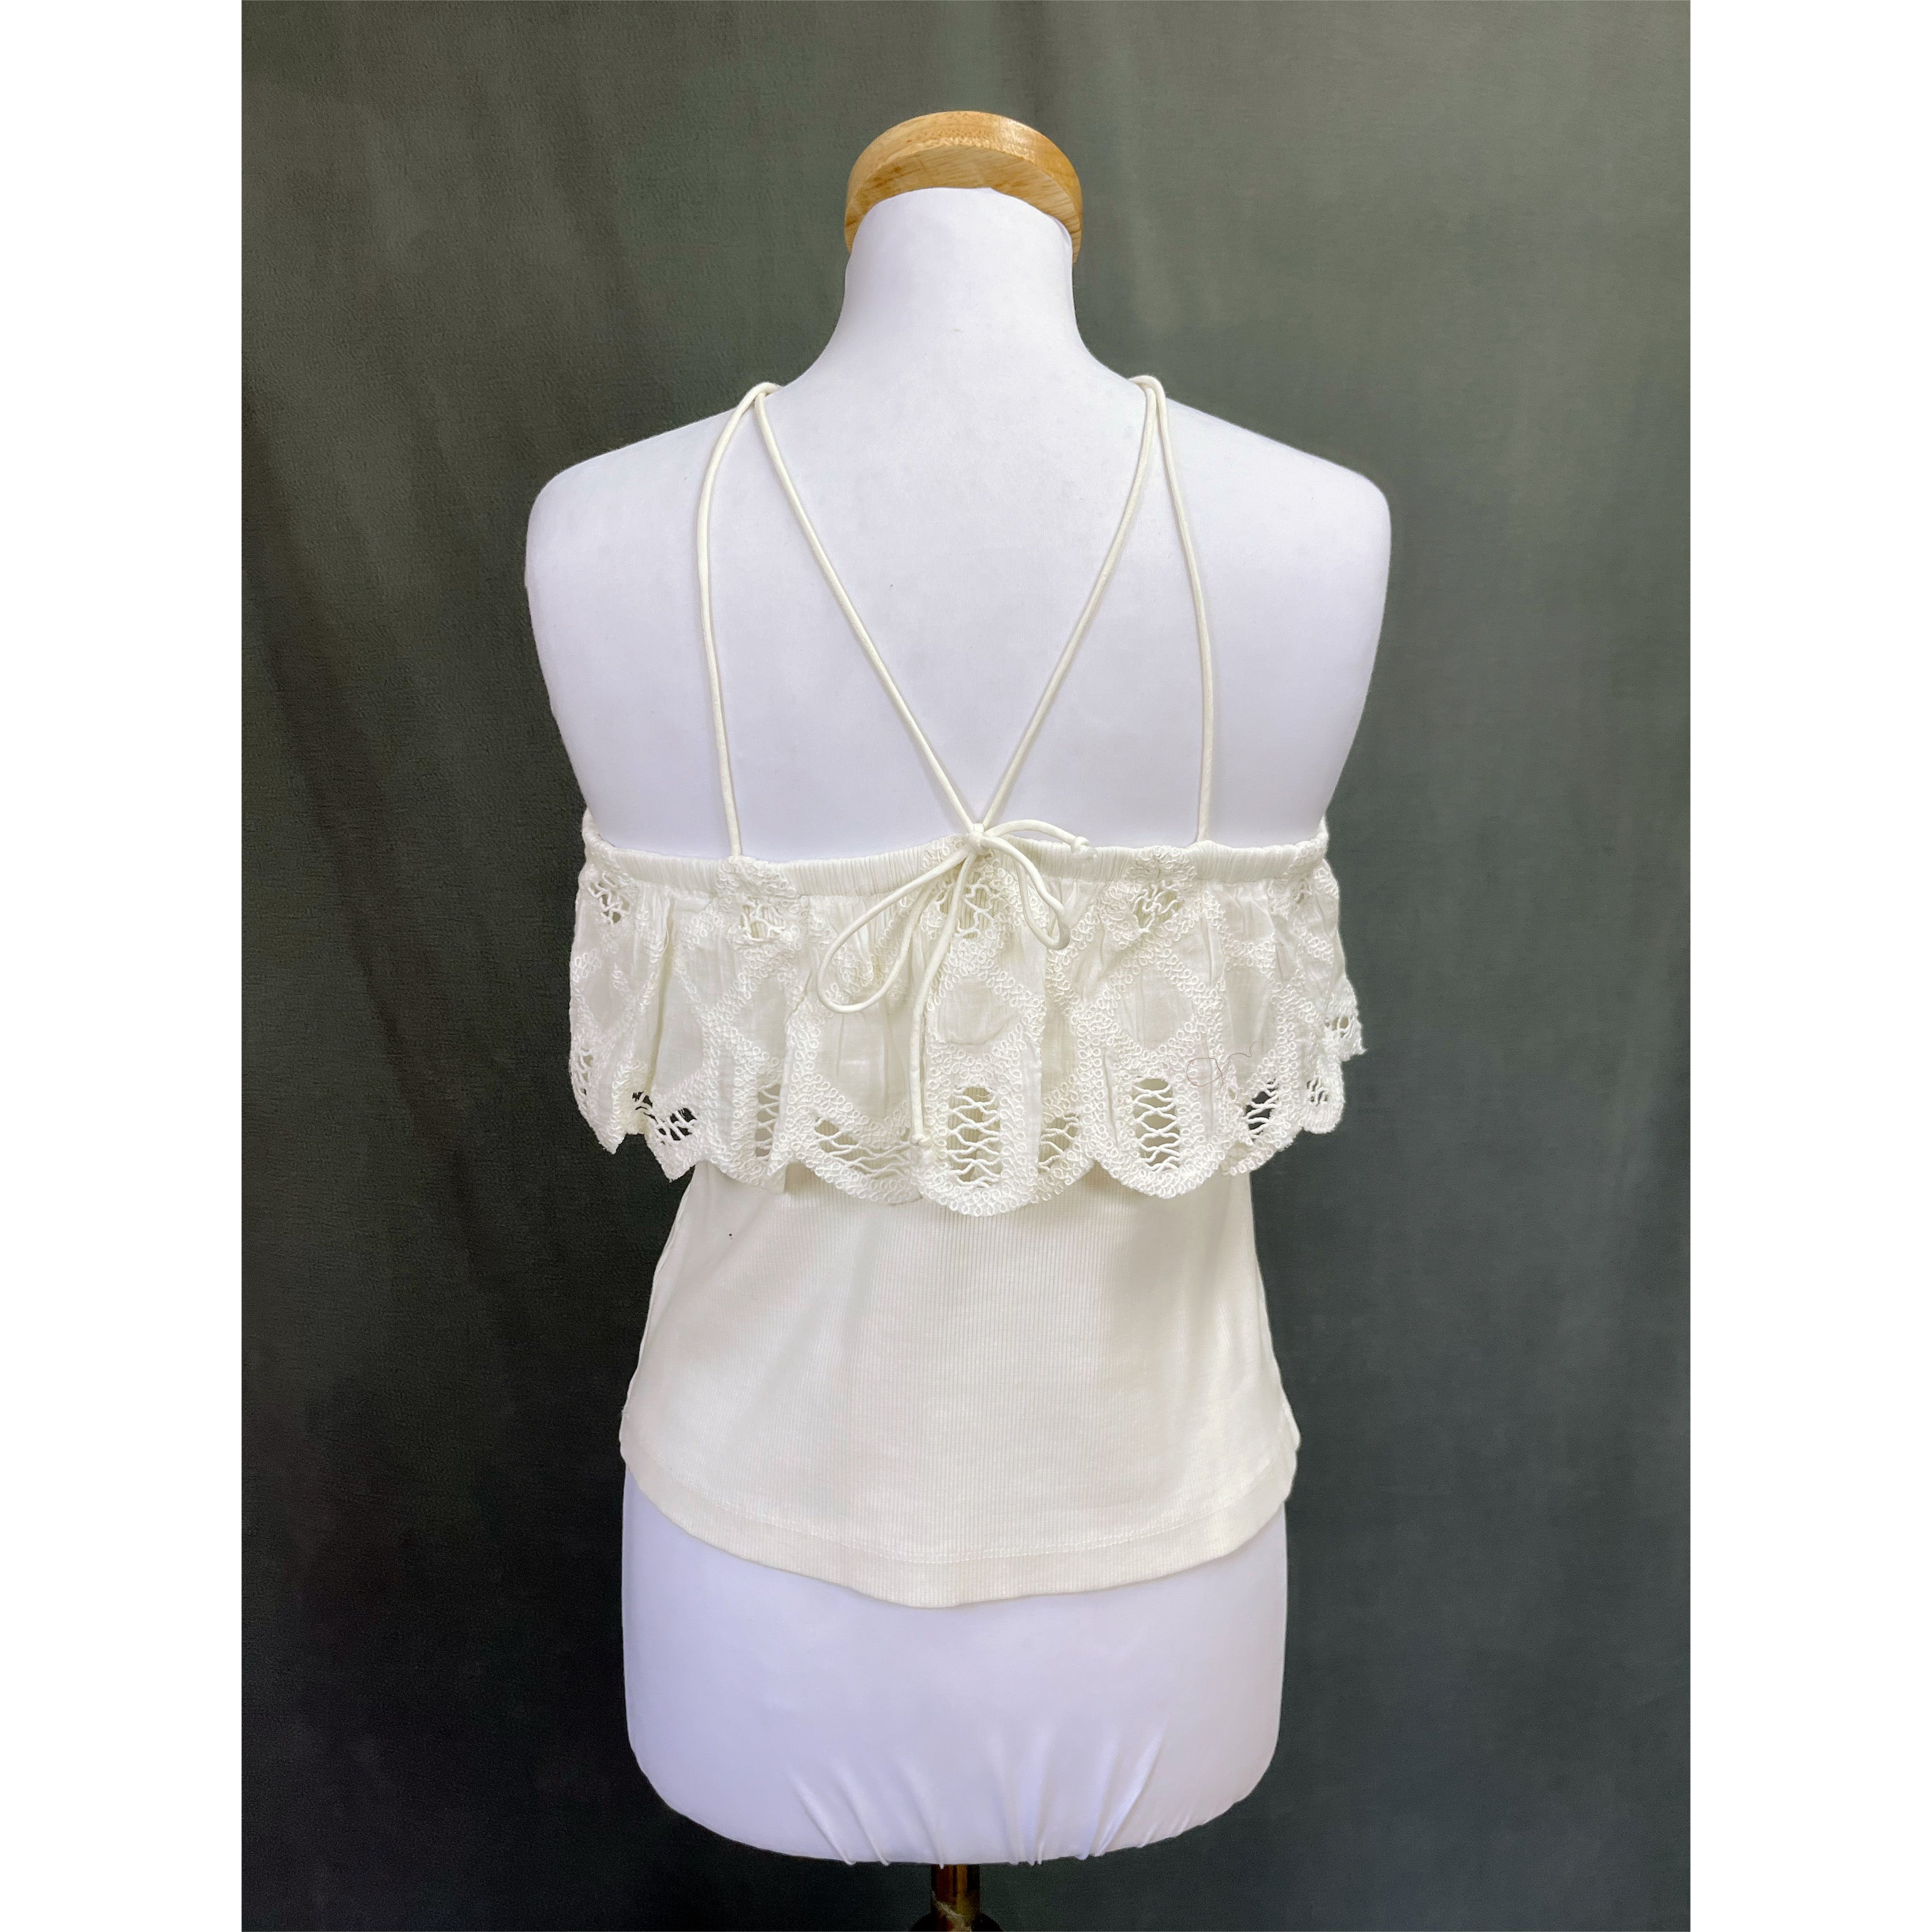 Anthropologie ivory top, size M